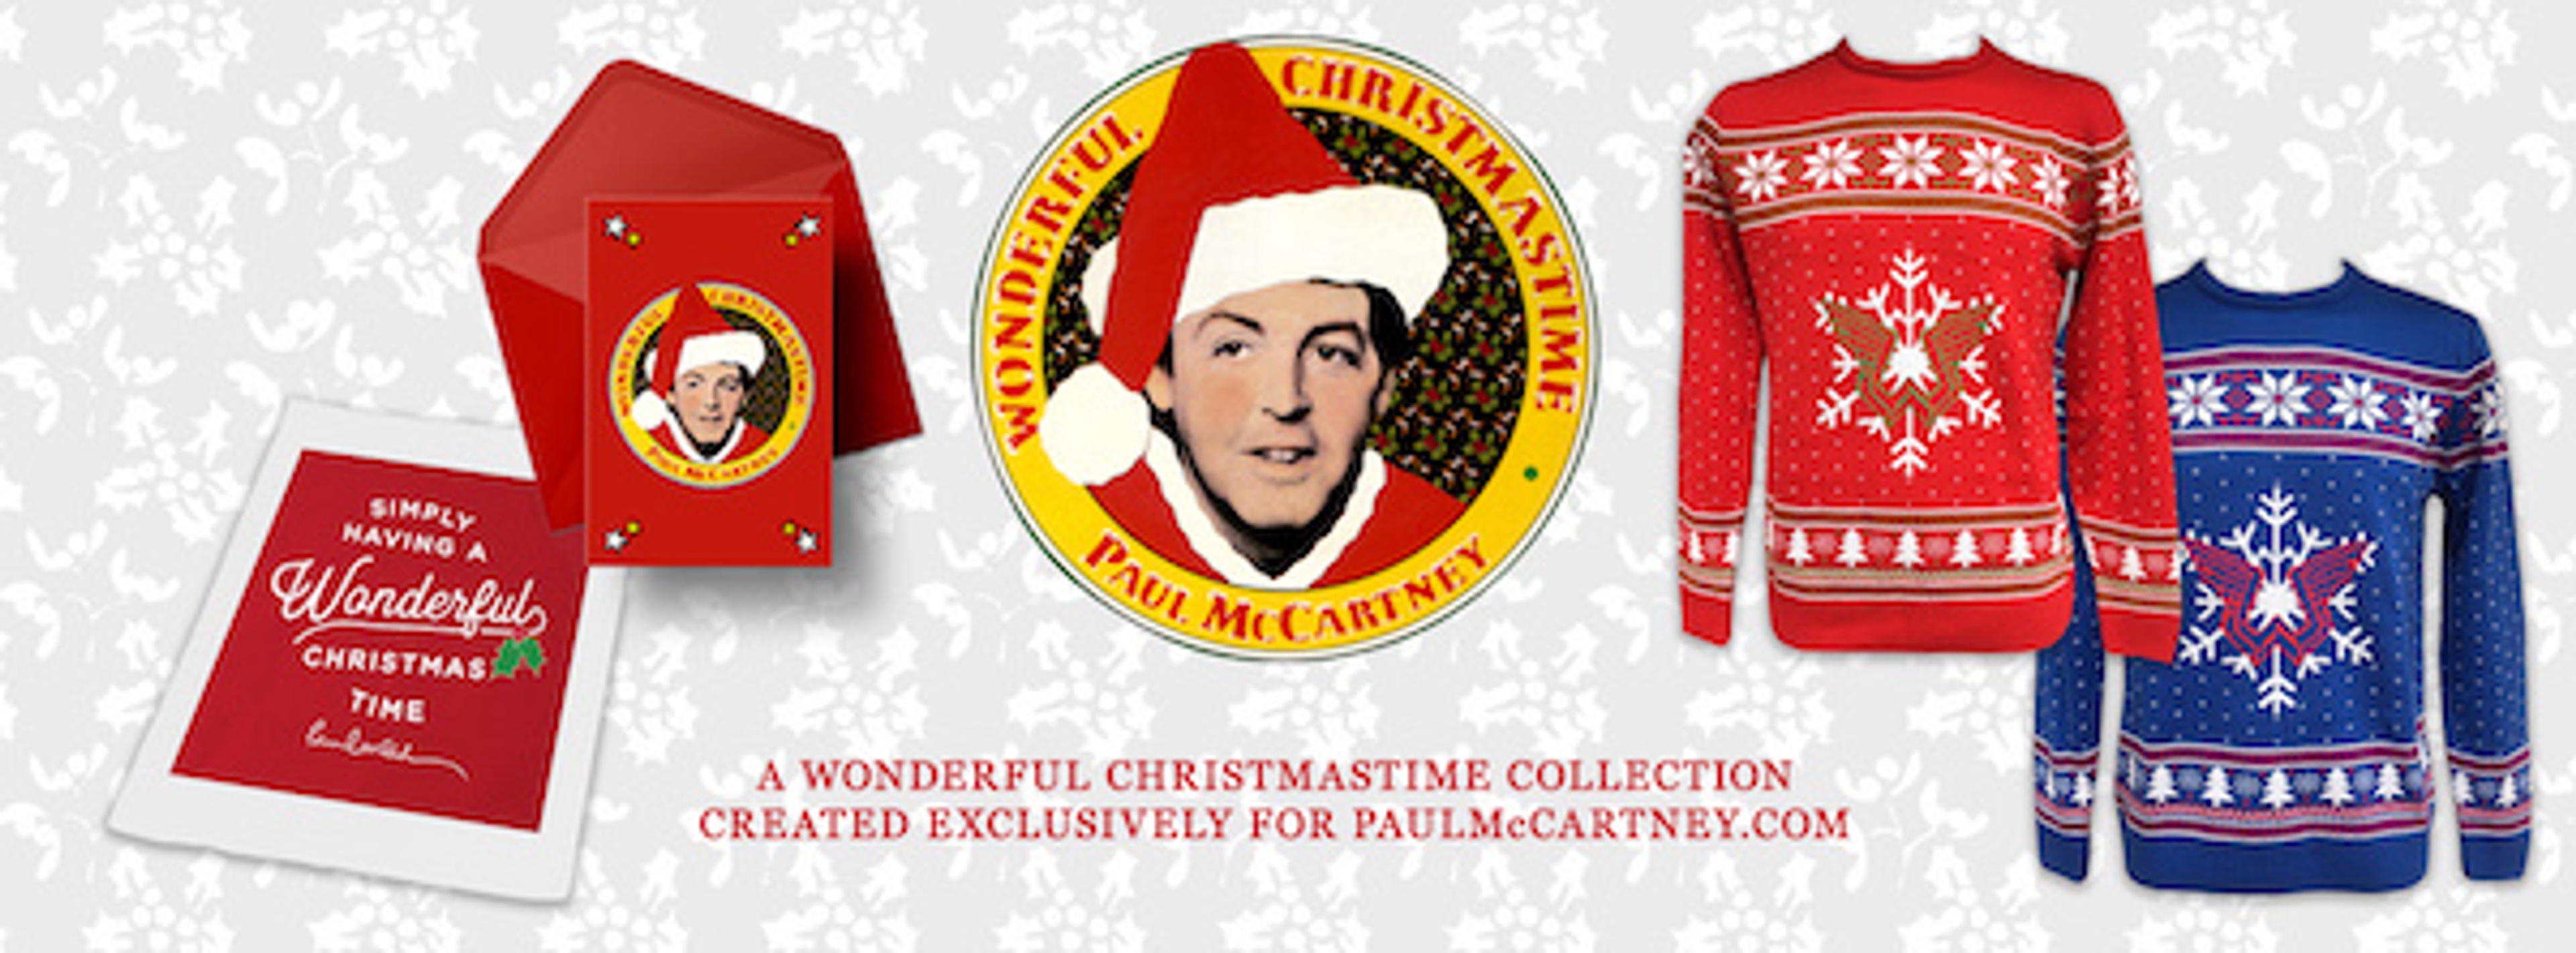 New 'Wonderful Christmastime' Merchandise - Out Now